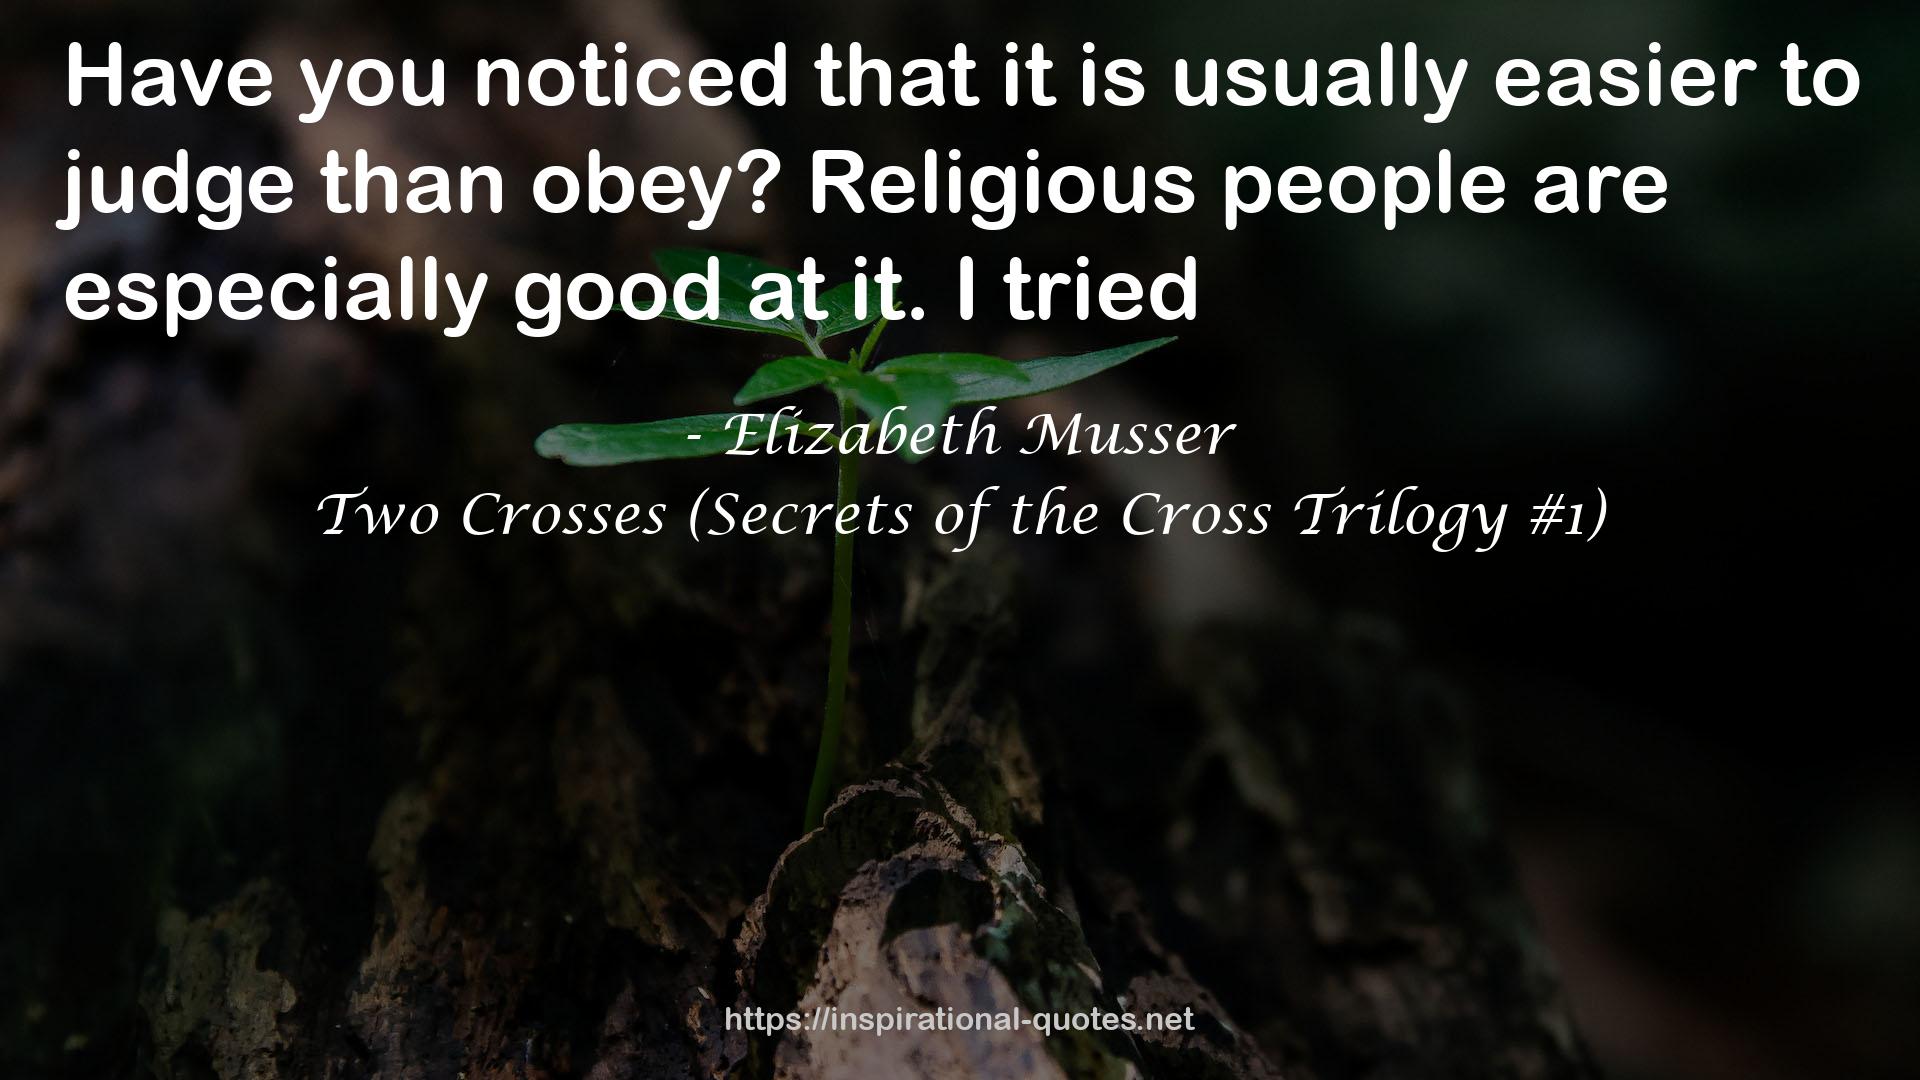 Two Crosses (Secrets of the Cross Trilogy #1) QUOTES